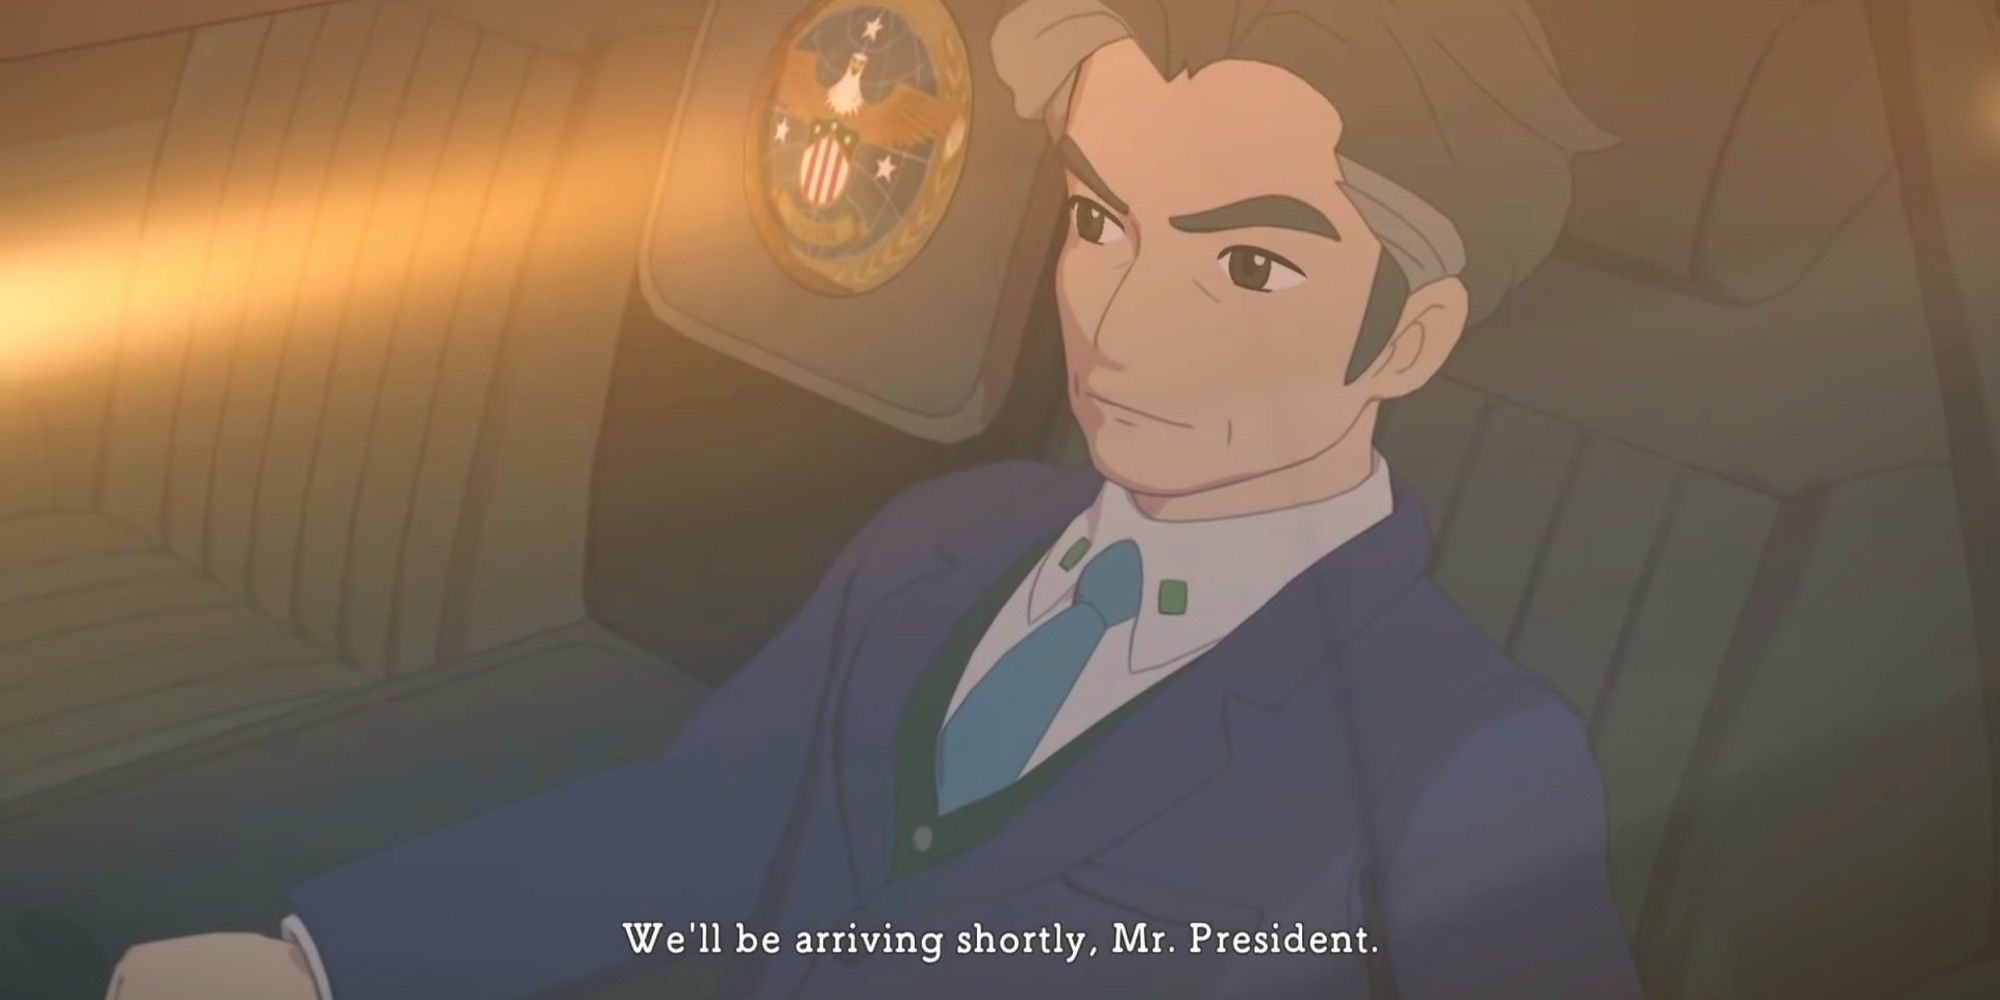 Ni No Kuni 2 starts with the US president in America somehow